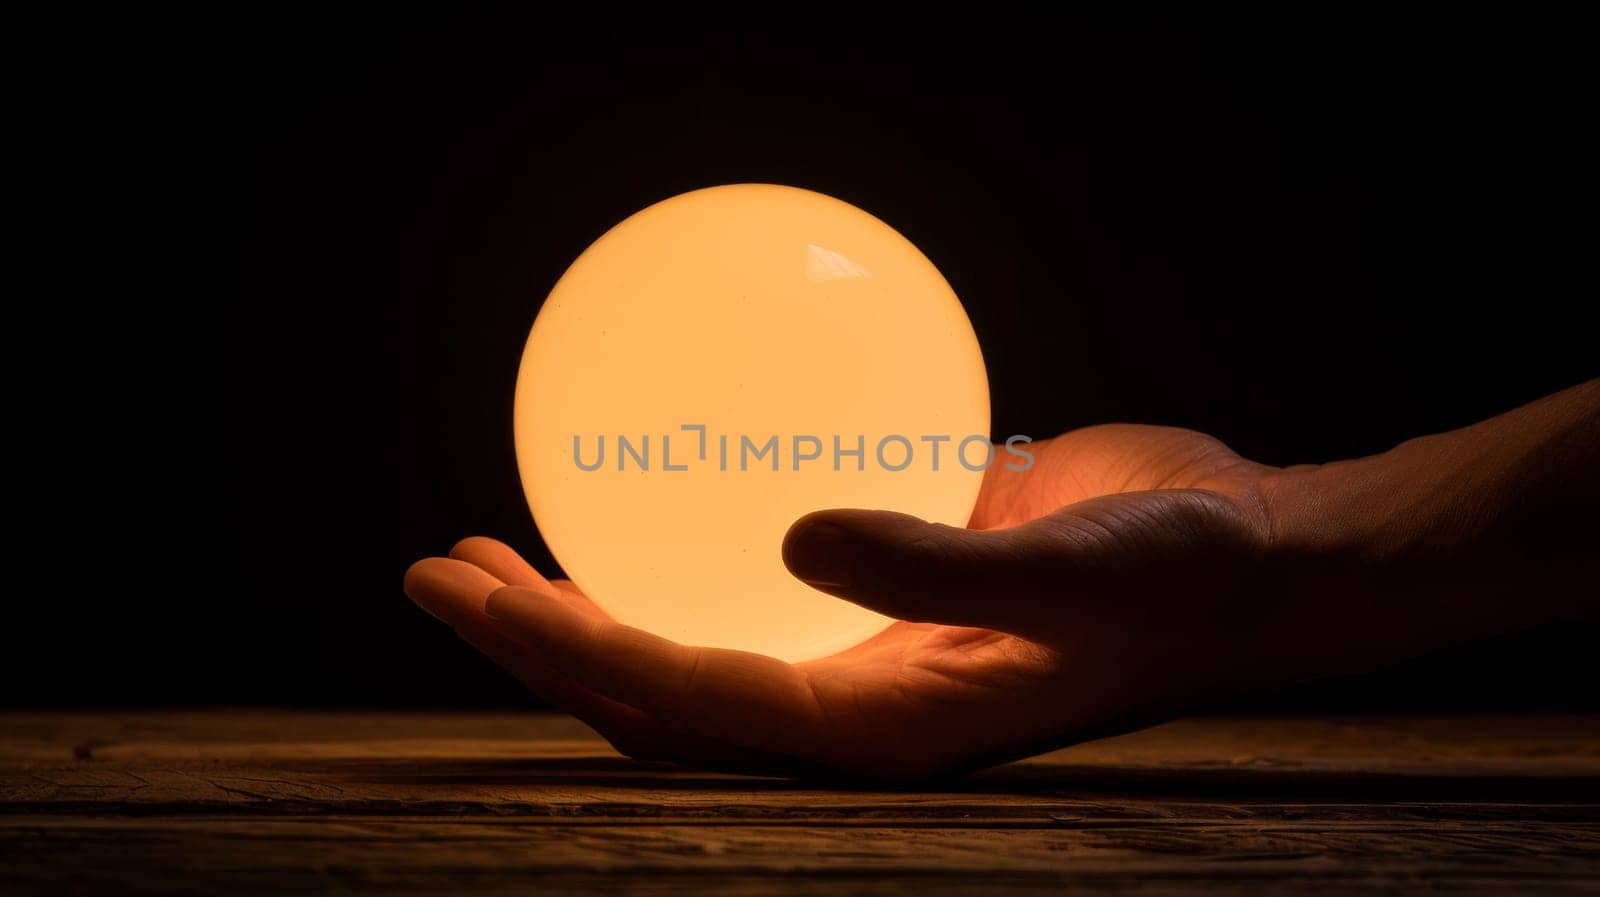 A person holding a glowing egg in their hand on top of wood